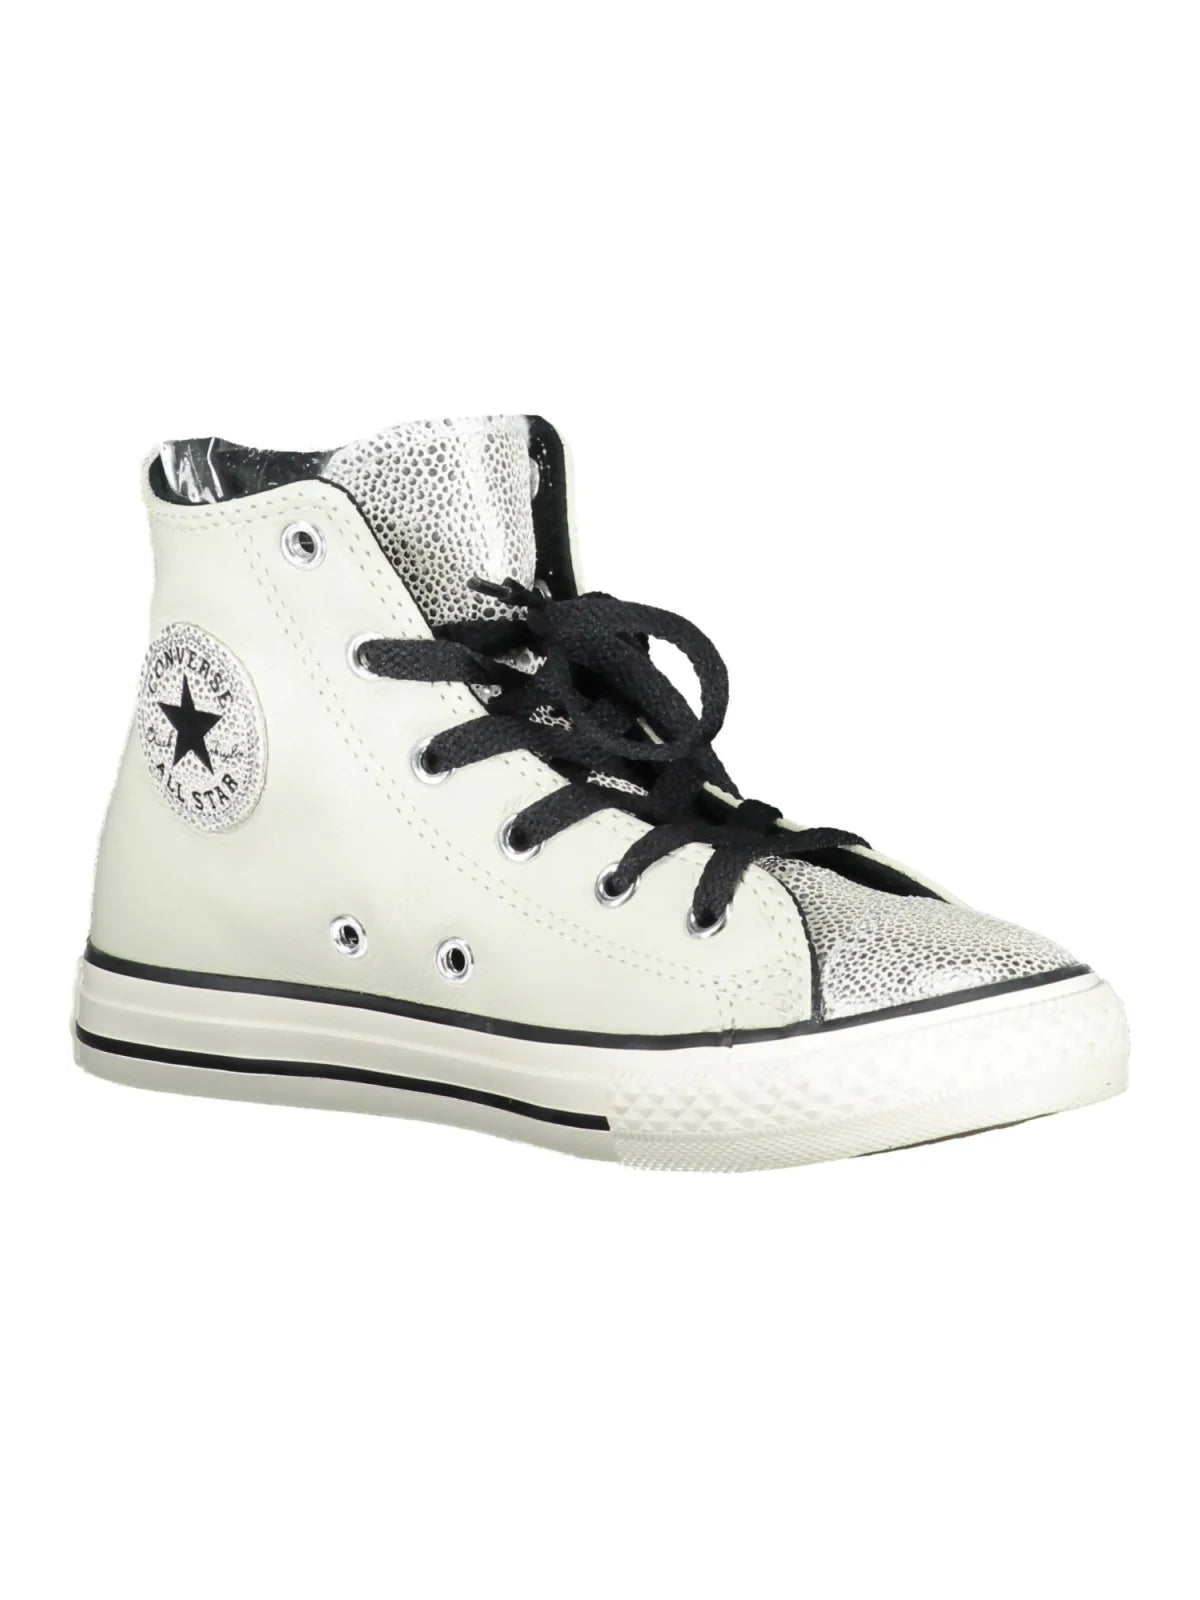 CONVERSE SPORTS SHOES FOR GIRLS SILVER